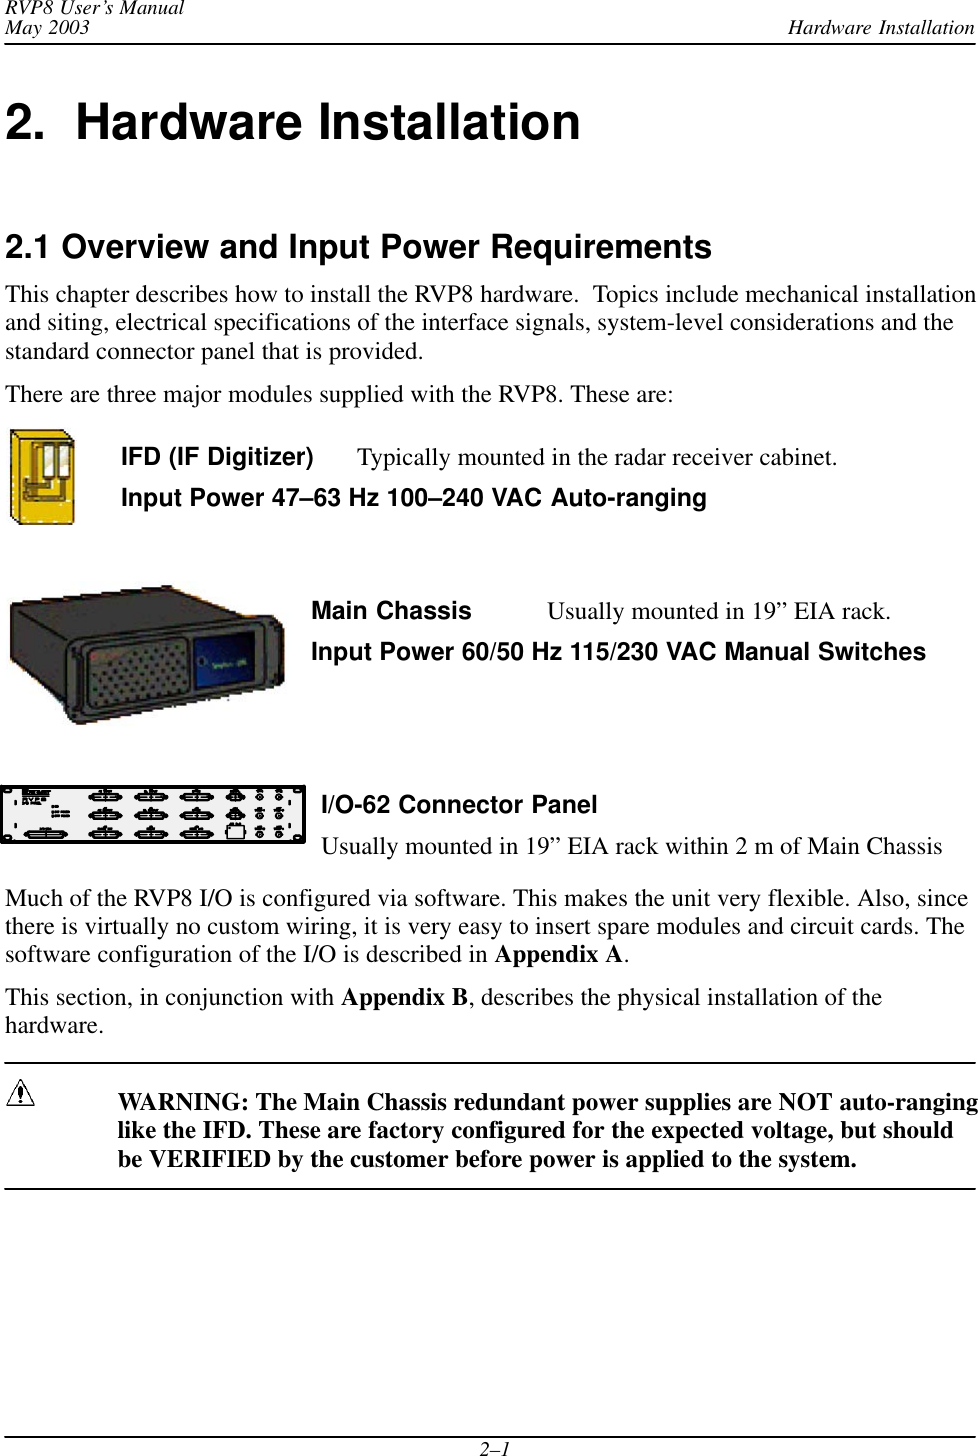 Hardware InstallationRVP8 User’s ManualMay 20032–12.  Hardware Installation2.1 Overview and Input Power RequirementsThis chapter describes how to install the RVP8 hardware.  Topics include mechanical installationand siting, electrical specifications of the interface signals, system-level considerations and thestandard connector panel that is provided.There are three major modules supplied with the RVP8. These are:IFD (IF Digitizer) Typically mounted in the radar receiver cabinet.Input Power 47–63 Hz 100–240 VAC Auto-rangingMain Chassis Usually mounted in 19” EIA rack.Input Power 60/50 Hz 115/230 VAC Manual SwitchesI/O-62 Connector PanelUsually mounted in 19” EIA rack within 2 m of Main ChassisMuch of the RVP8 I/O is configured via software. This makes the unit very flexible. Also, sincethere is virtually no custom wiring, it is very easy to insert spare modules and circuit cards. Thesoftware configuration of the I/O is described in Appendix A.This section, in conjunction with Appendix B, describes the physical installation of thehardware.WARNING: The Main Chassis redundant power supplies are NOT auto-ranginglike the IFD. These are factory configured for the expected voltage, but shouldbe VERIFIED by the customer before power is applied to the system.